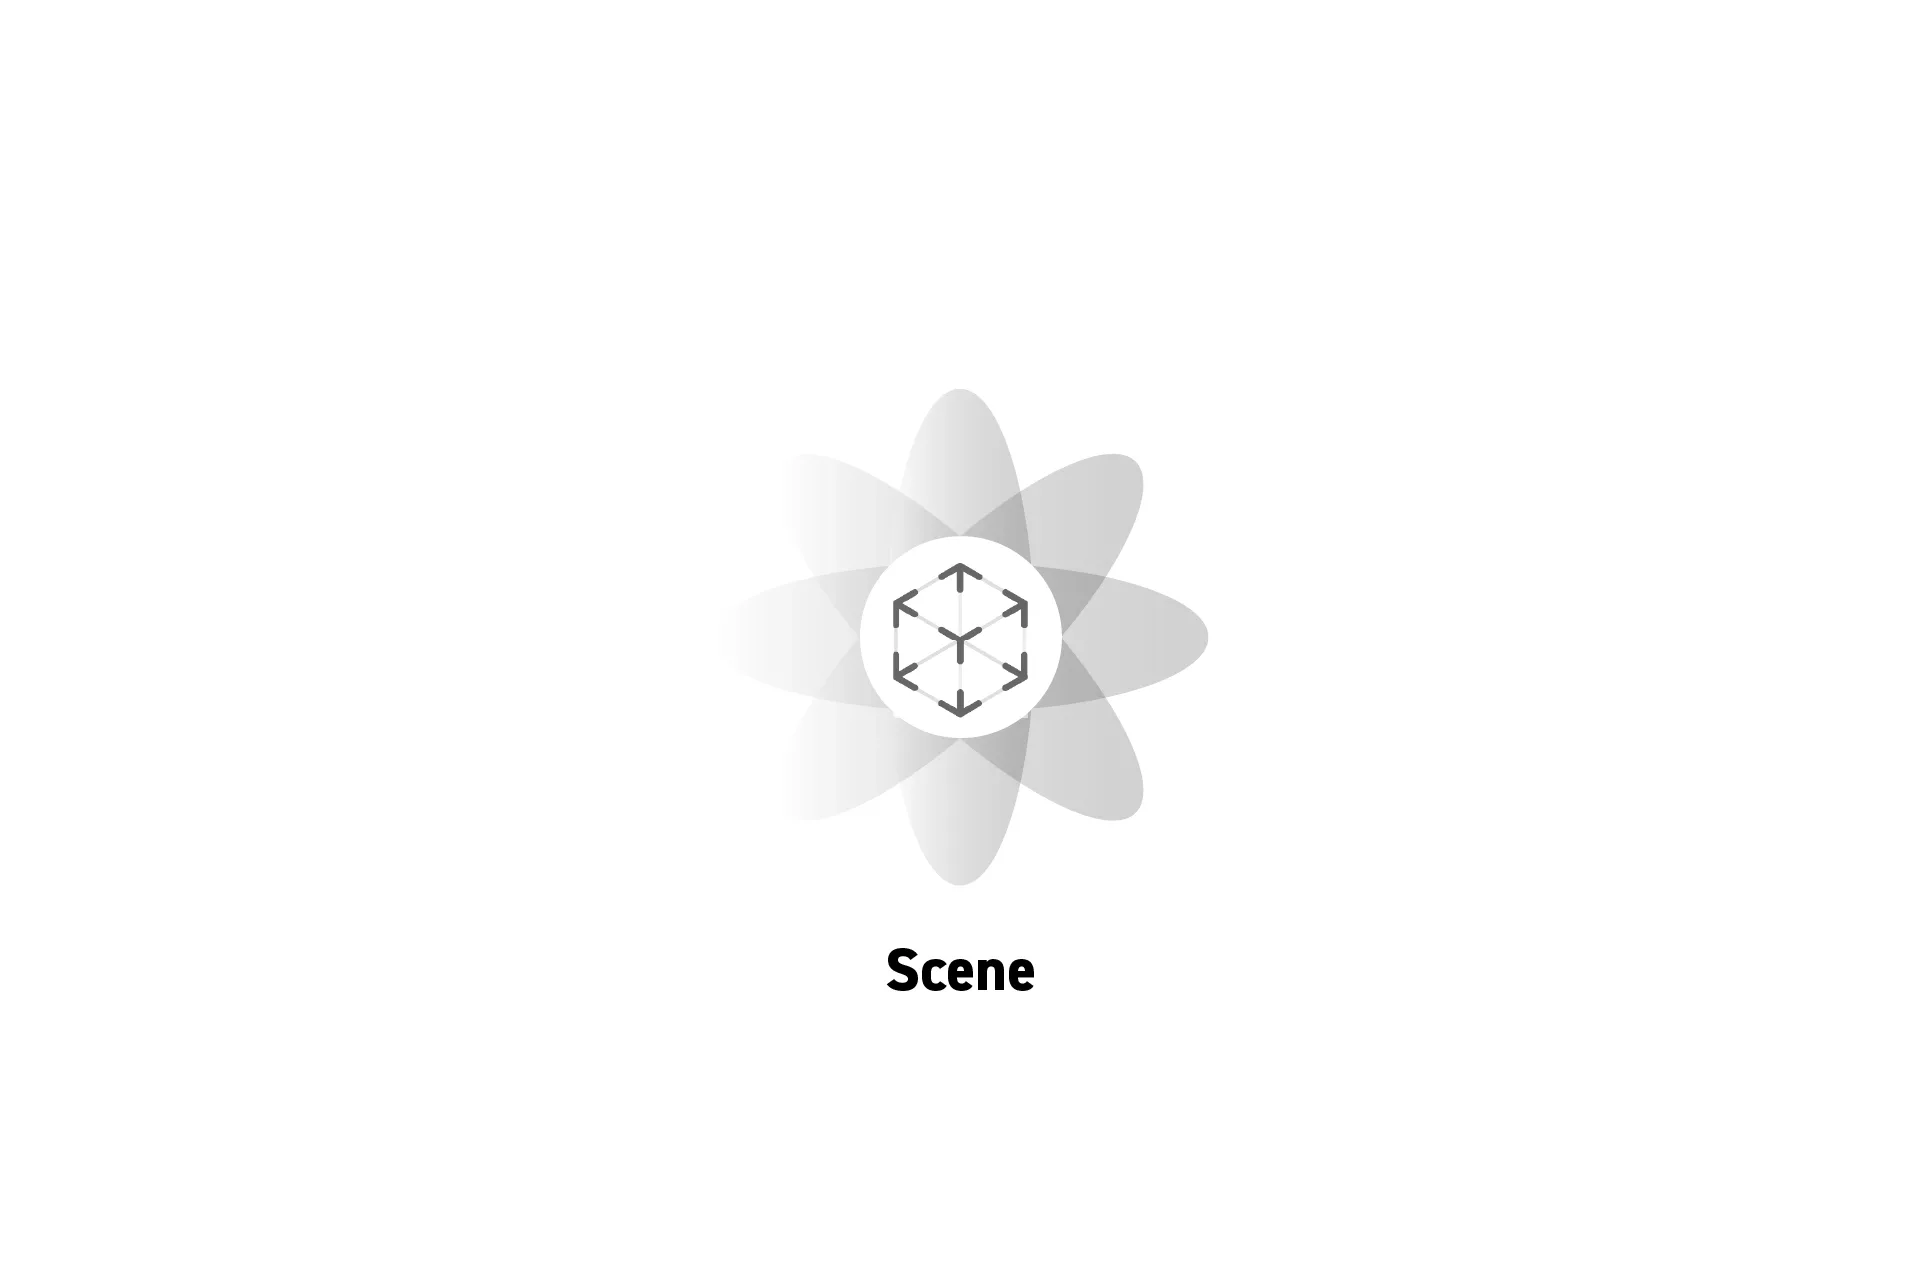 A flower that represents spatial computing with the text "Scene" beneath it.